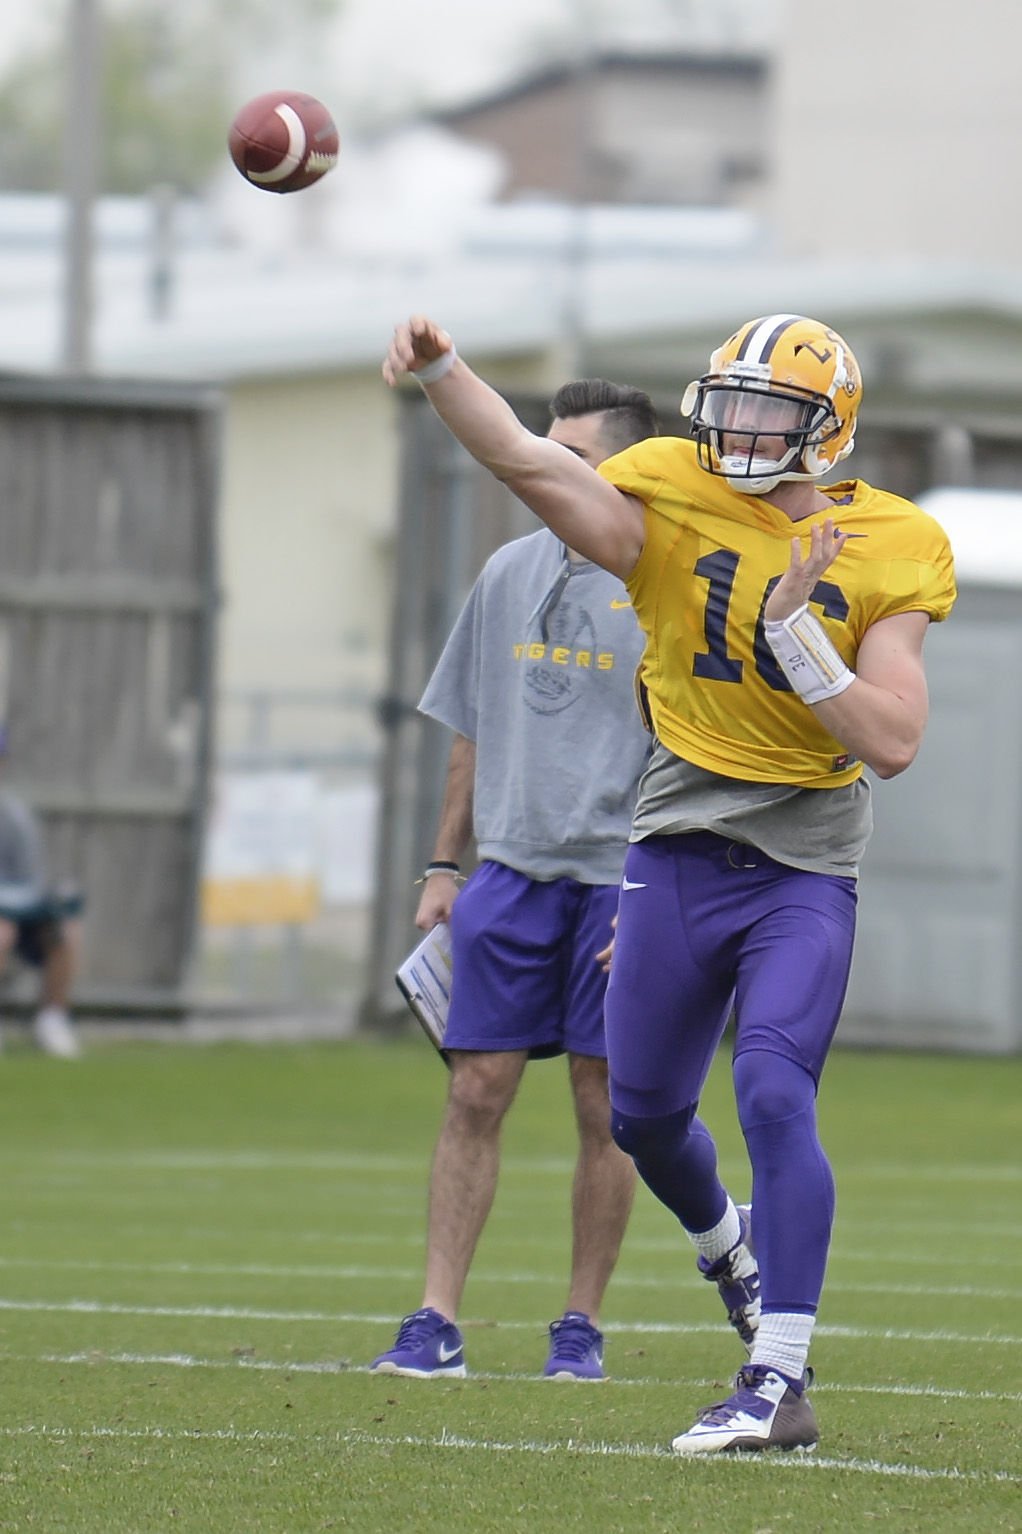 Report: New England Patriots & Danny Etling Agree To 4 